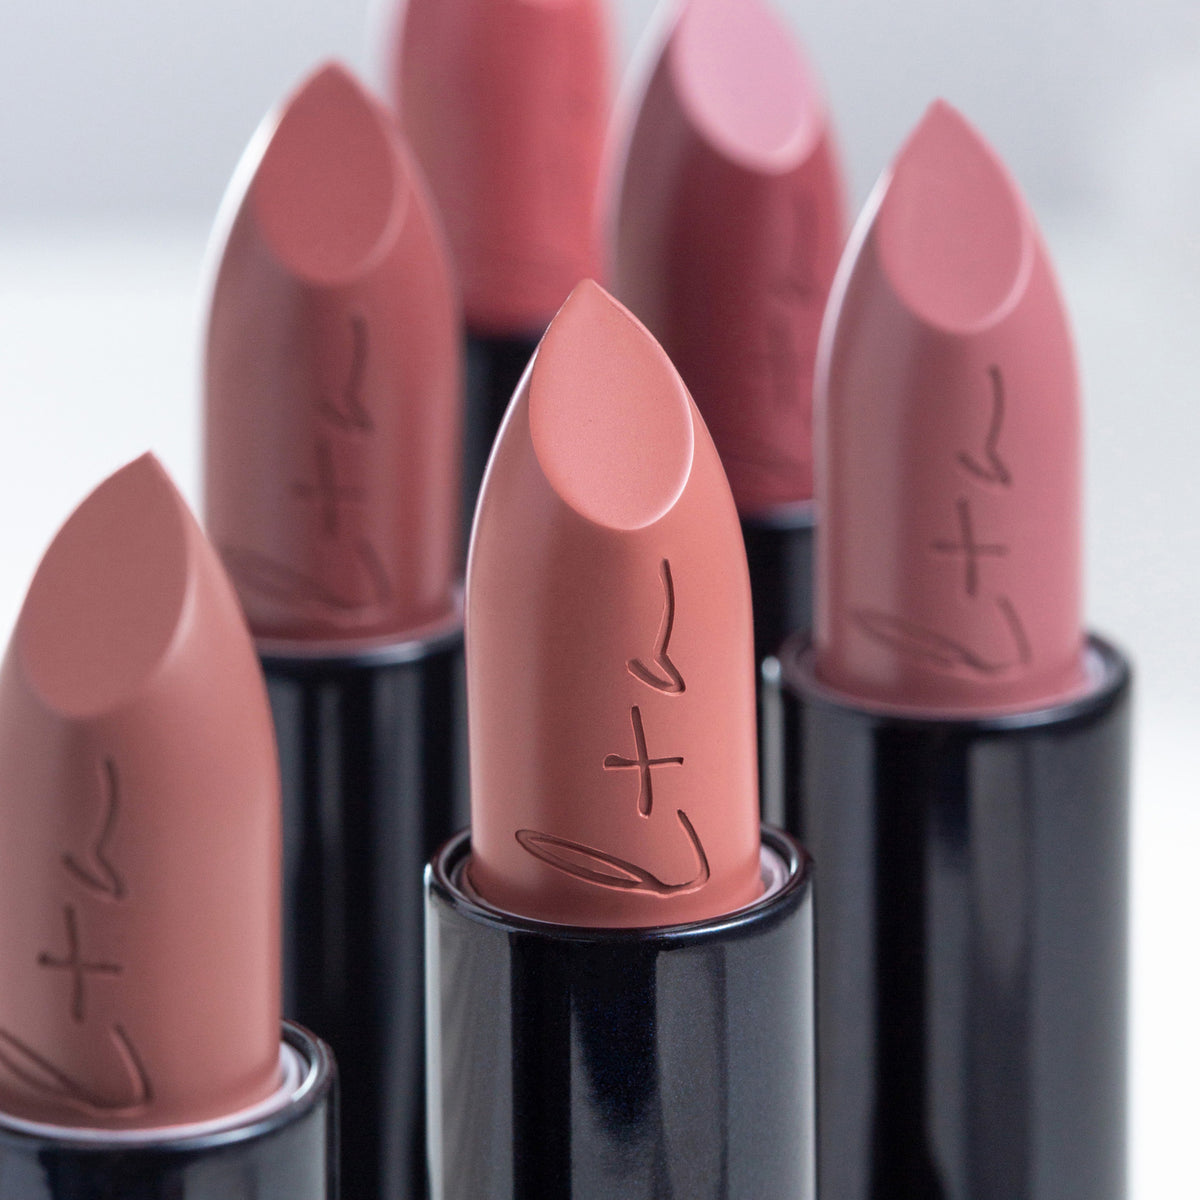 Lune+Aster PowerLips Lipstick . This product is in the color nude